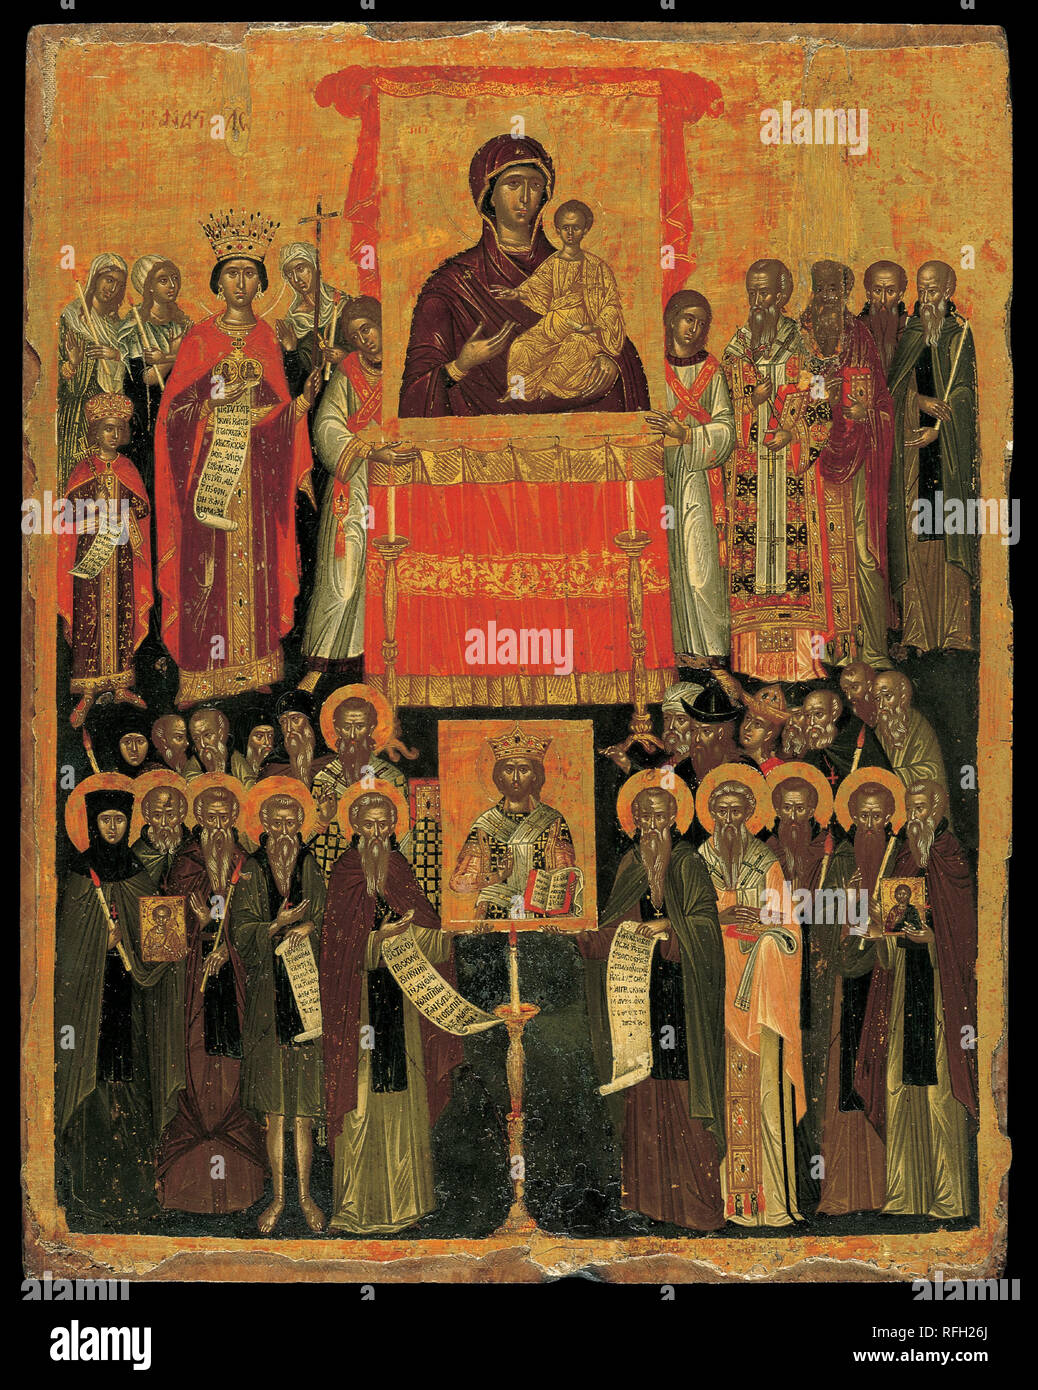 The Restoration of the Icons. Date/Period: 1550 - 1575. Icon. Height: 512 mm (20.15 in); Width: 407 mm (16.02 in). Author: UNKNOWN ARTIST. Byzantine icon. Stock Photo